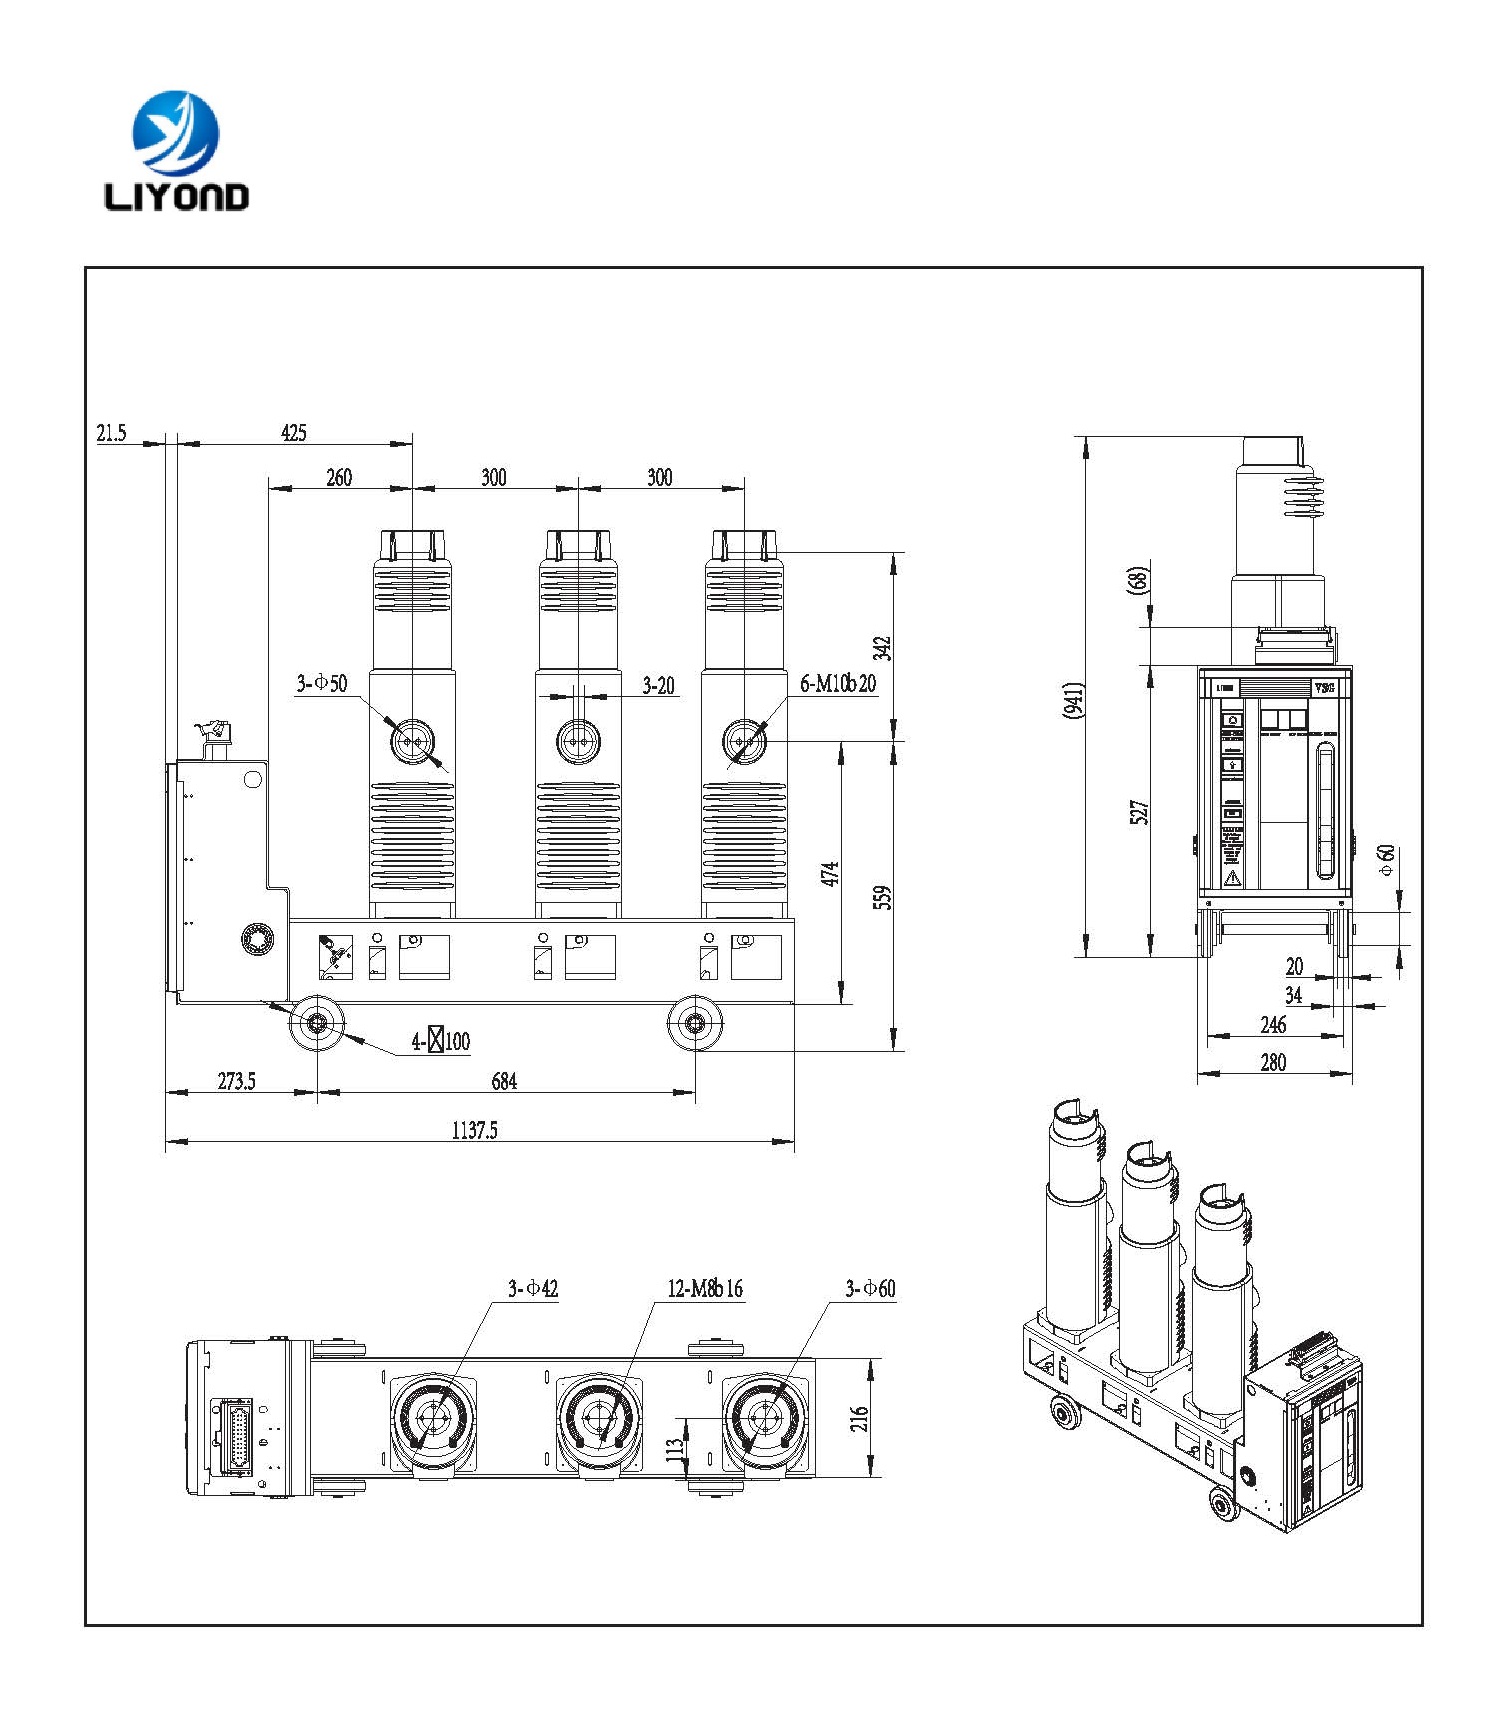 VSG-C/40.5 embedded pole lateral type indoor circuit breaker drawing